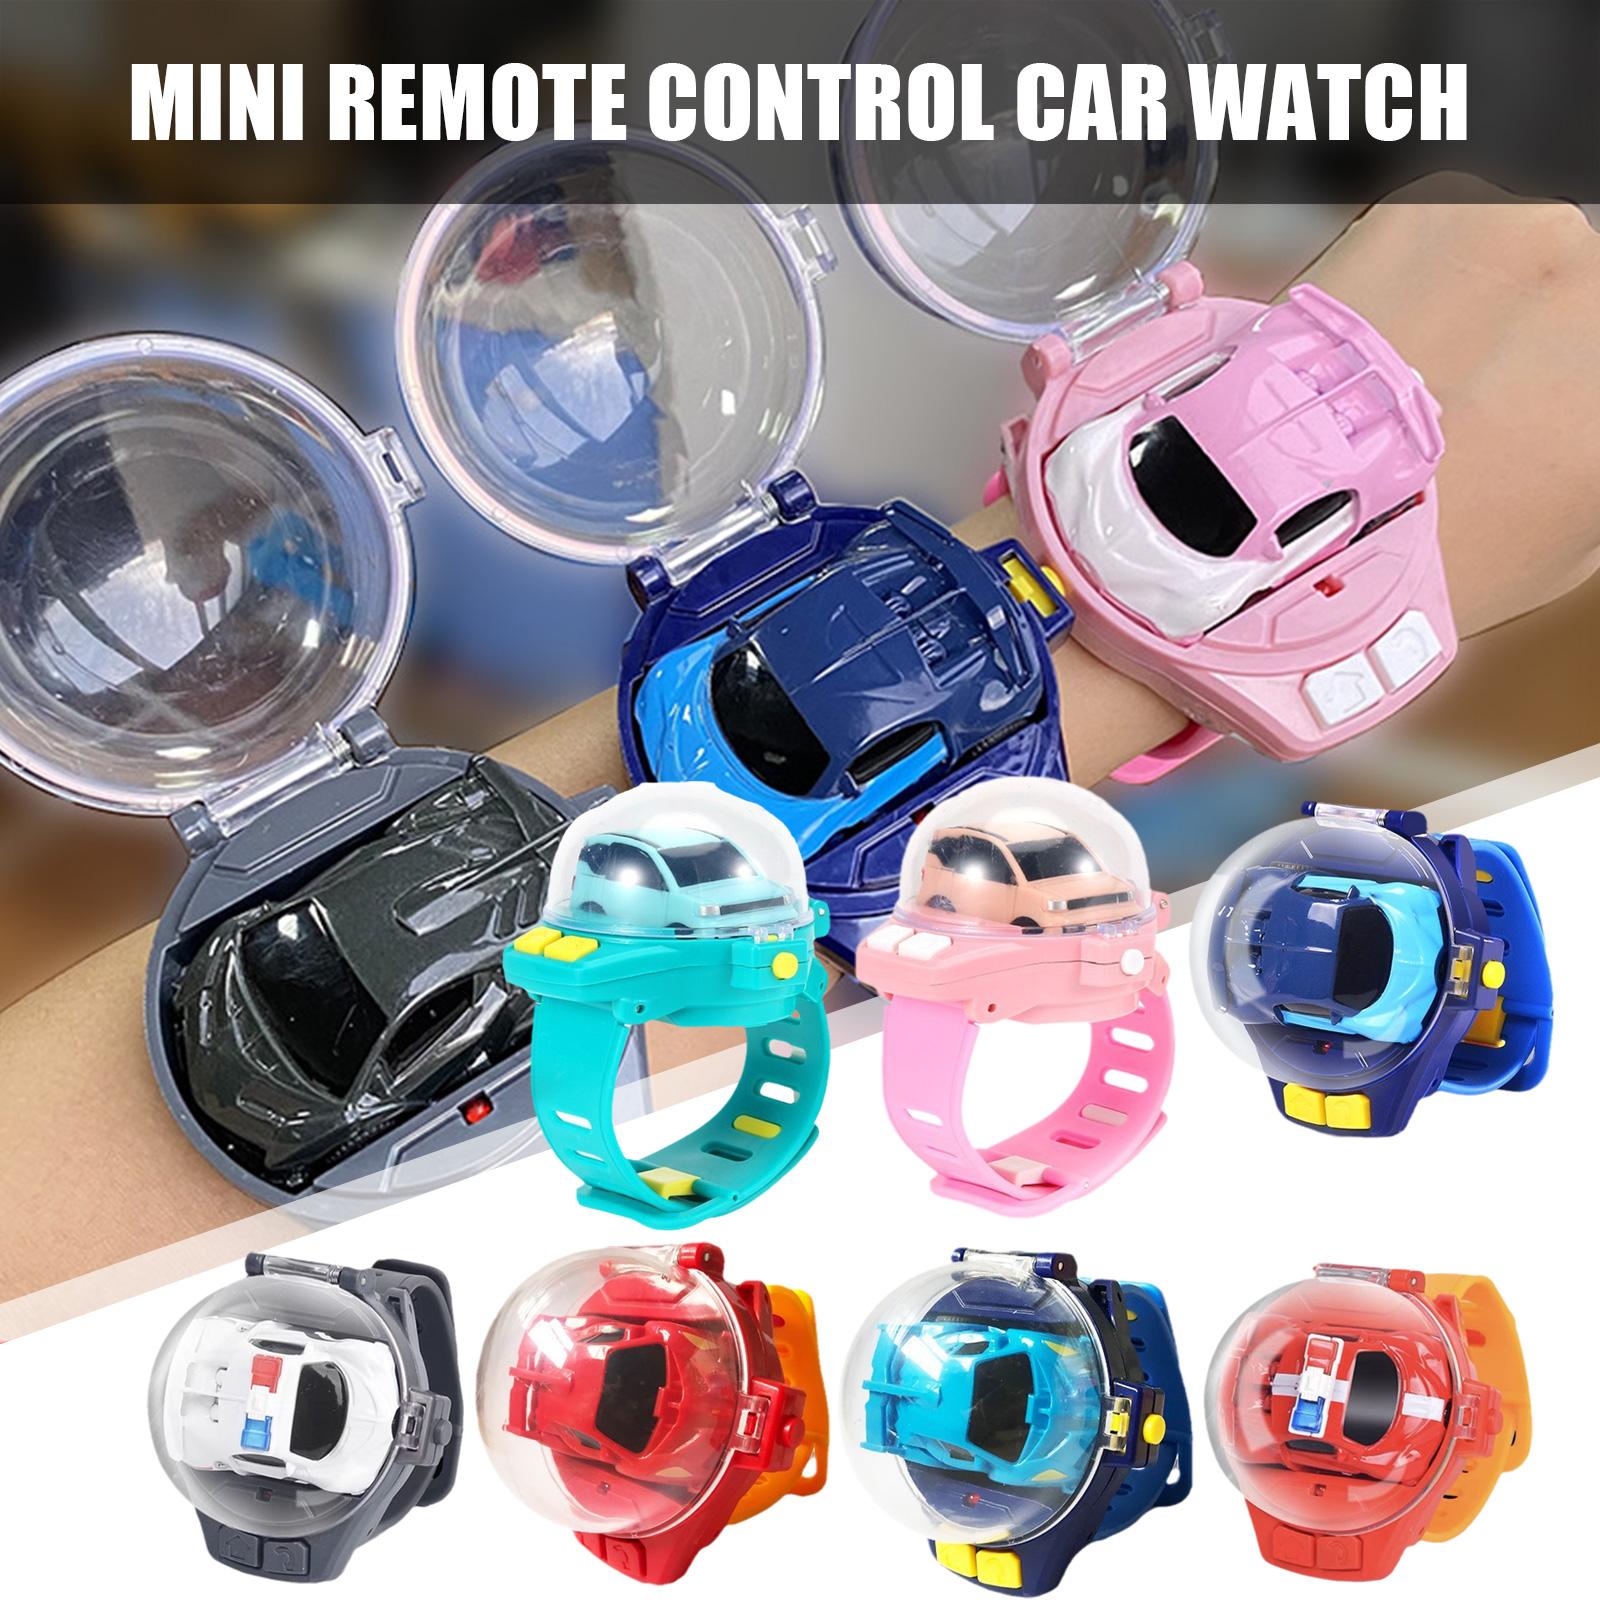 Children's Watch Remote Control Car Toy Birthday Present Watch Modeling Ingenious Toy For Boys Kids Remote Control Car Truck Toy